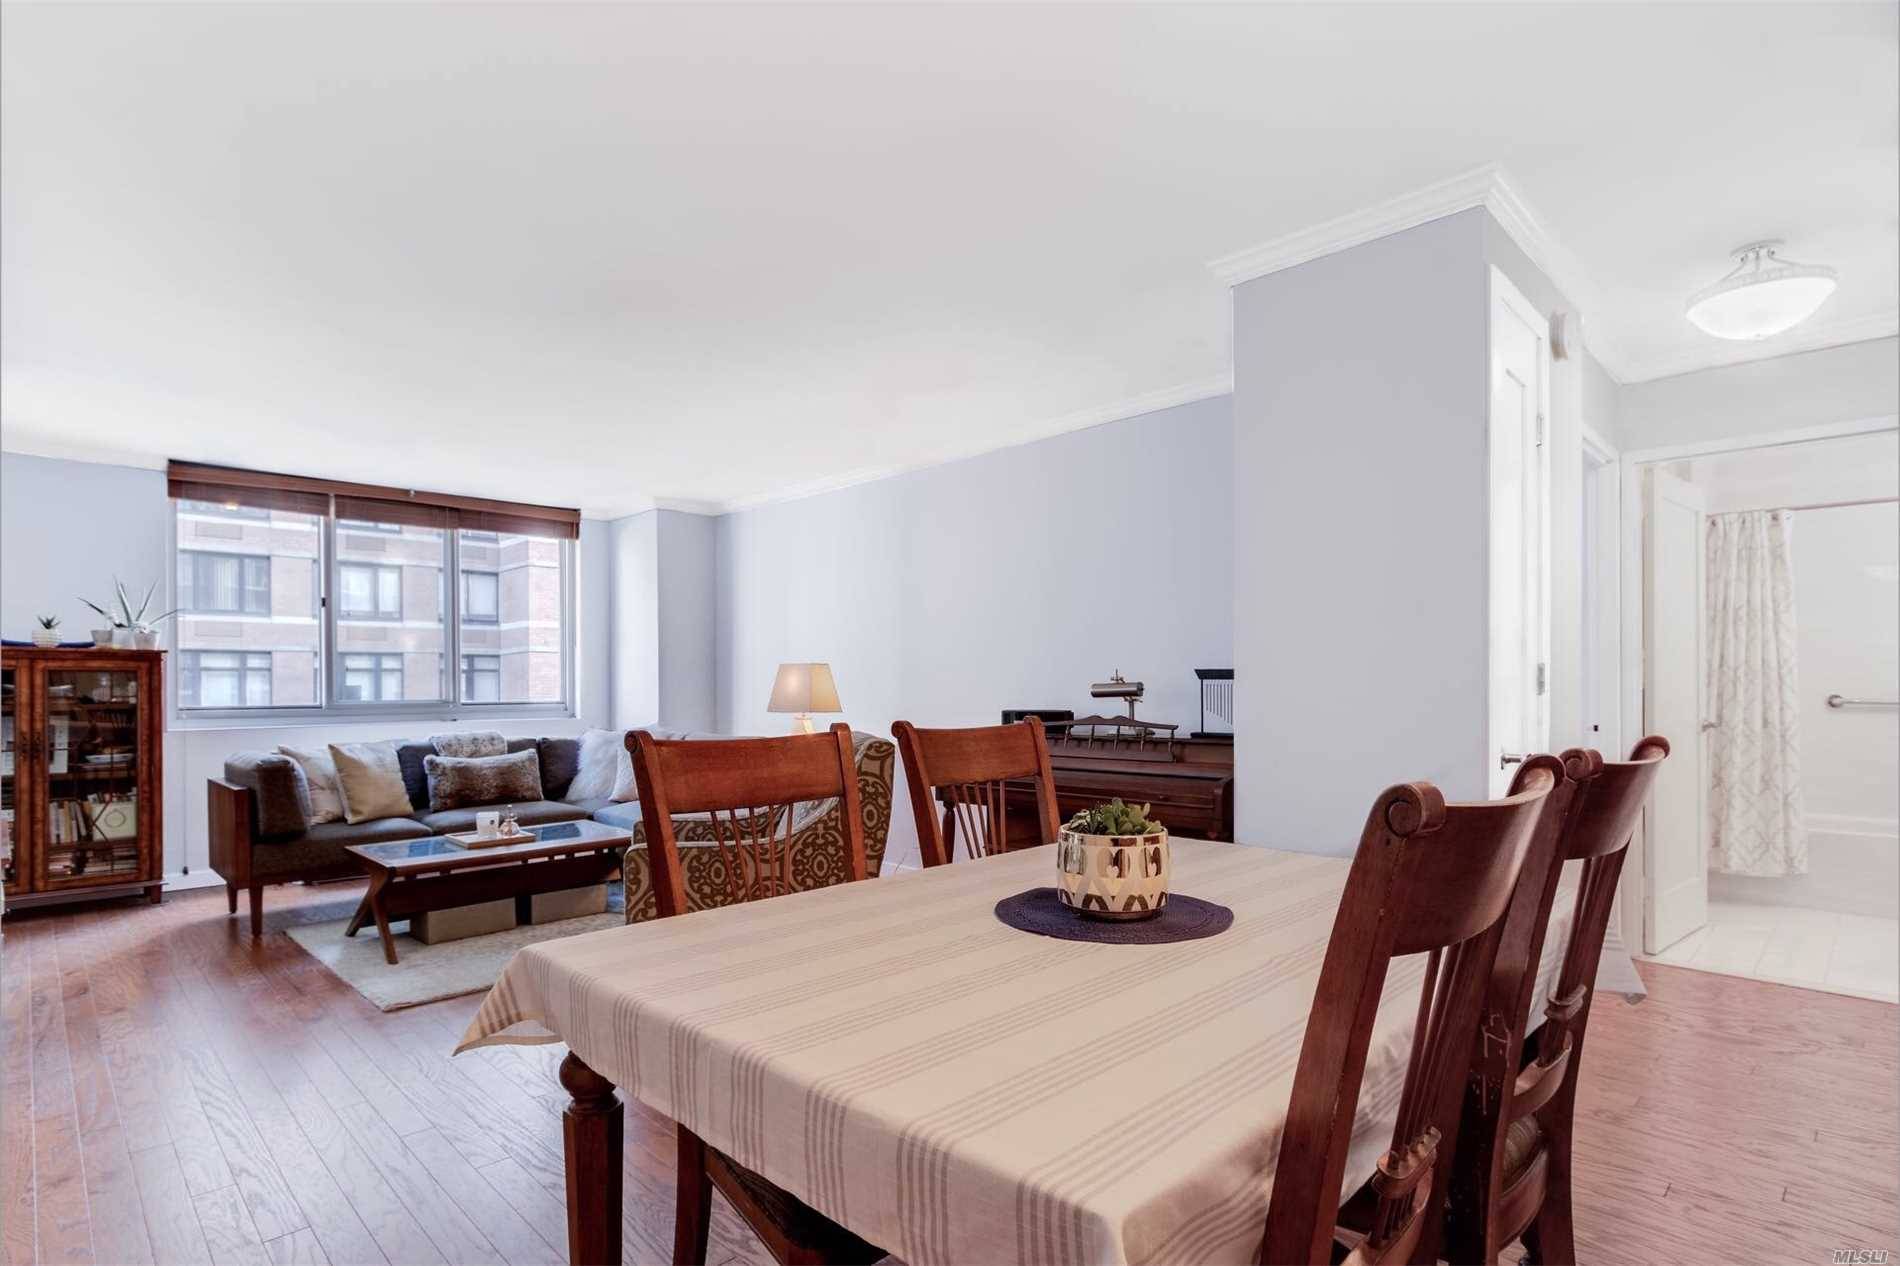 Large updated luxury 1BR apartment w newly added finishes throughout rich plank flooring, inset doors w new door hardware, skim coated ceiling with classic crown molding, new lighting fixtures, and ...